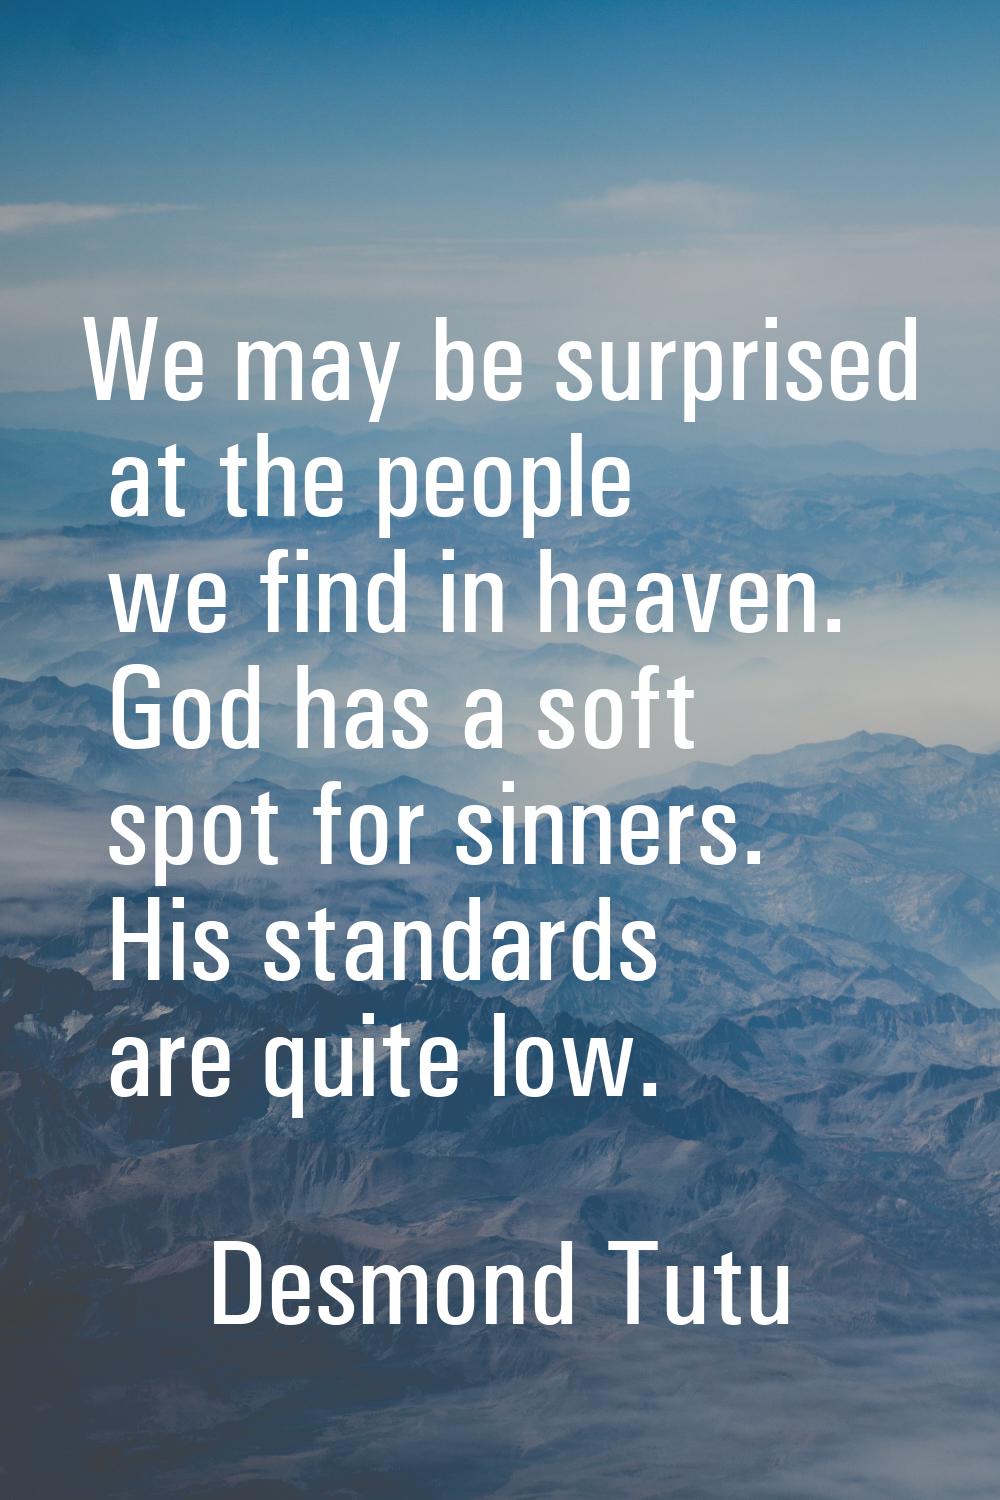 We may be surprised at the people we find in heaven. God has a soft spot for sinners. His standards